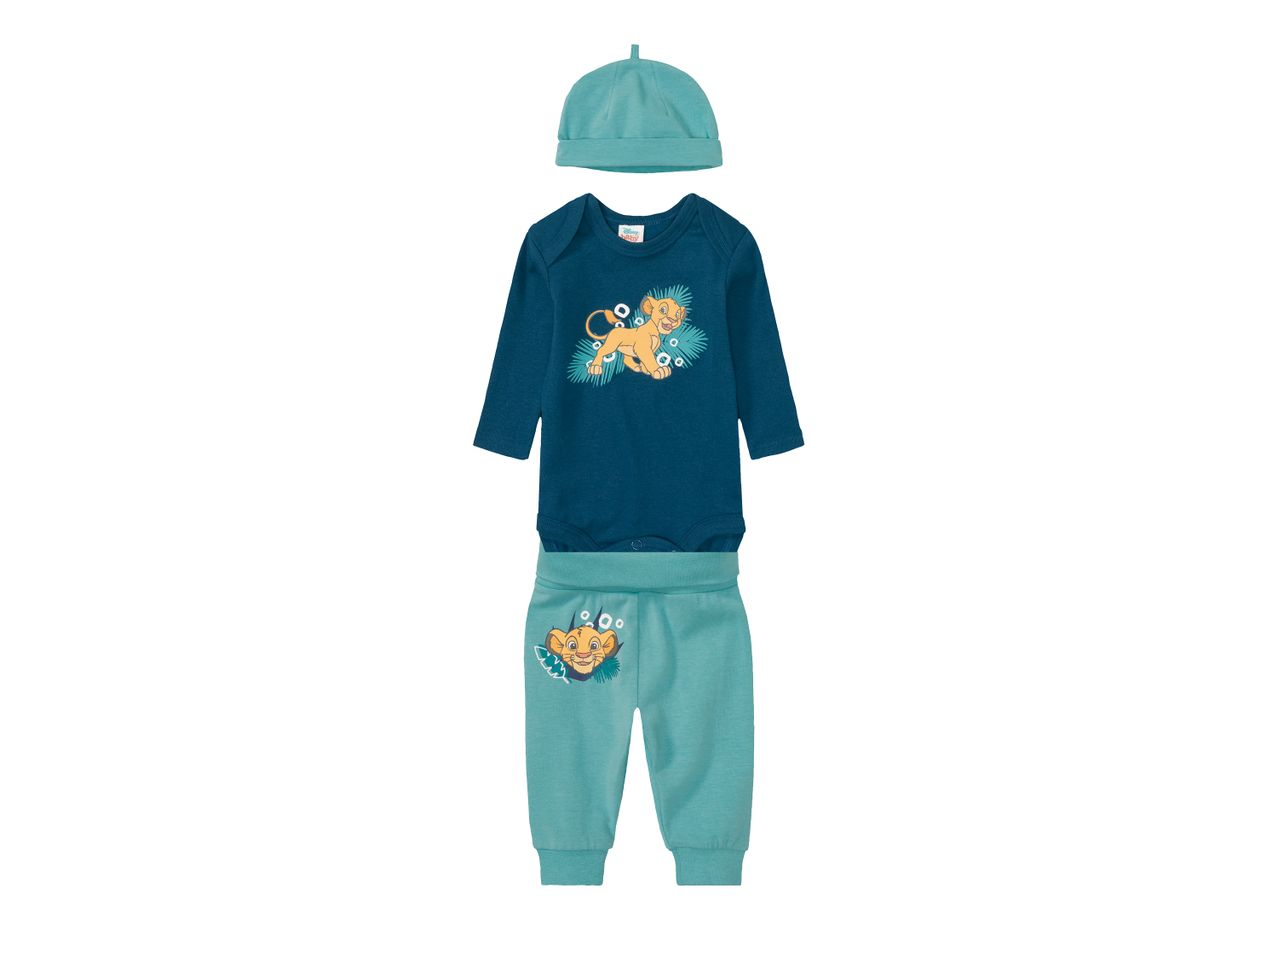 Go to full screen view: Babies’ Outfit “Disney" - Image 3